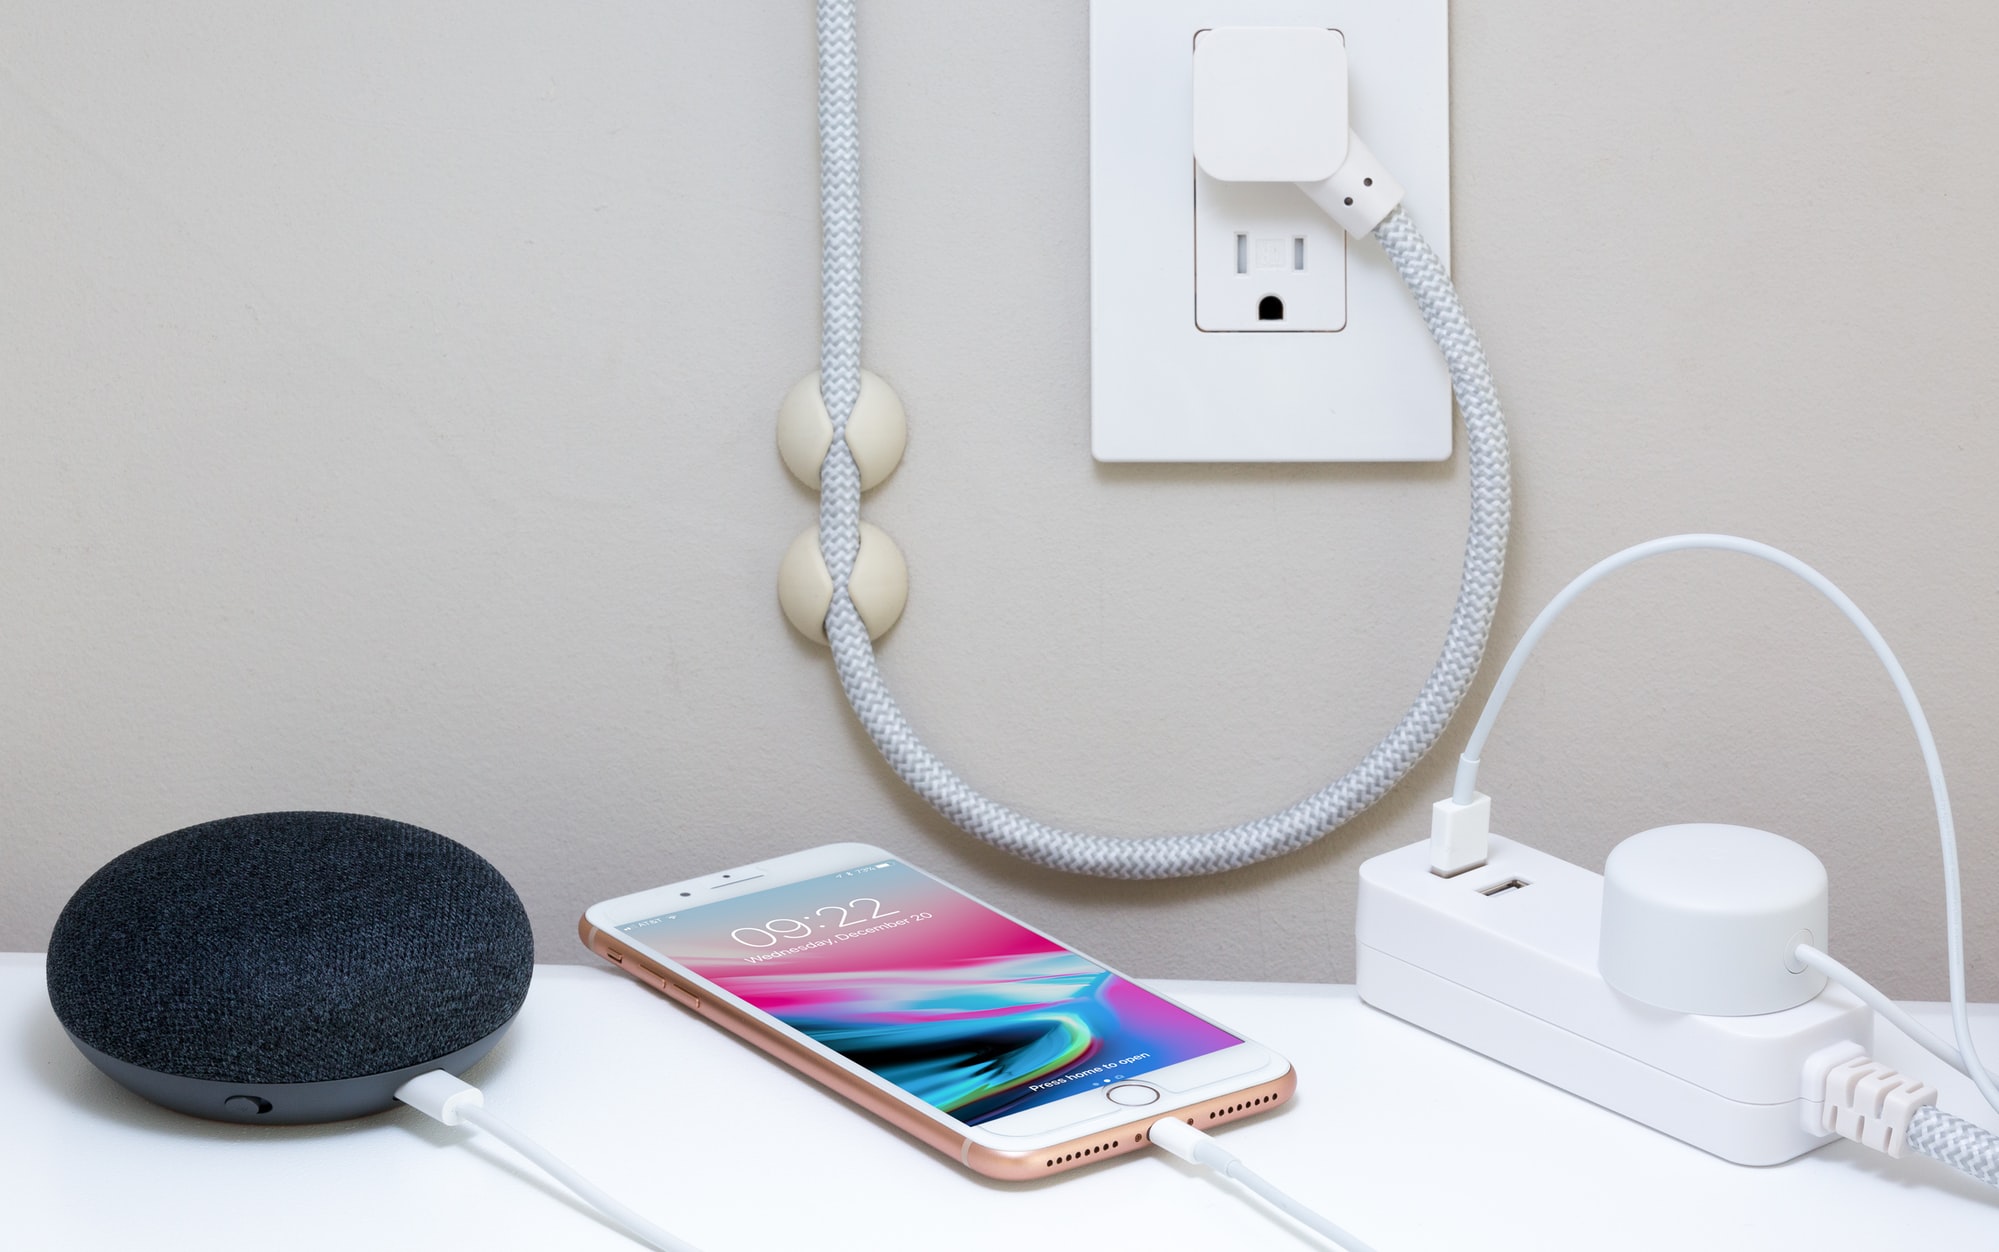 Picture of a smartphone and a smart speaker wired into a socket